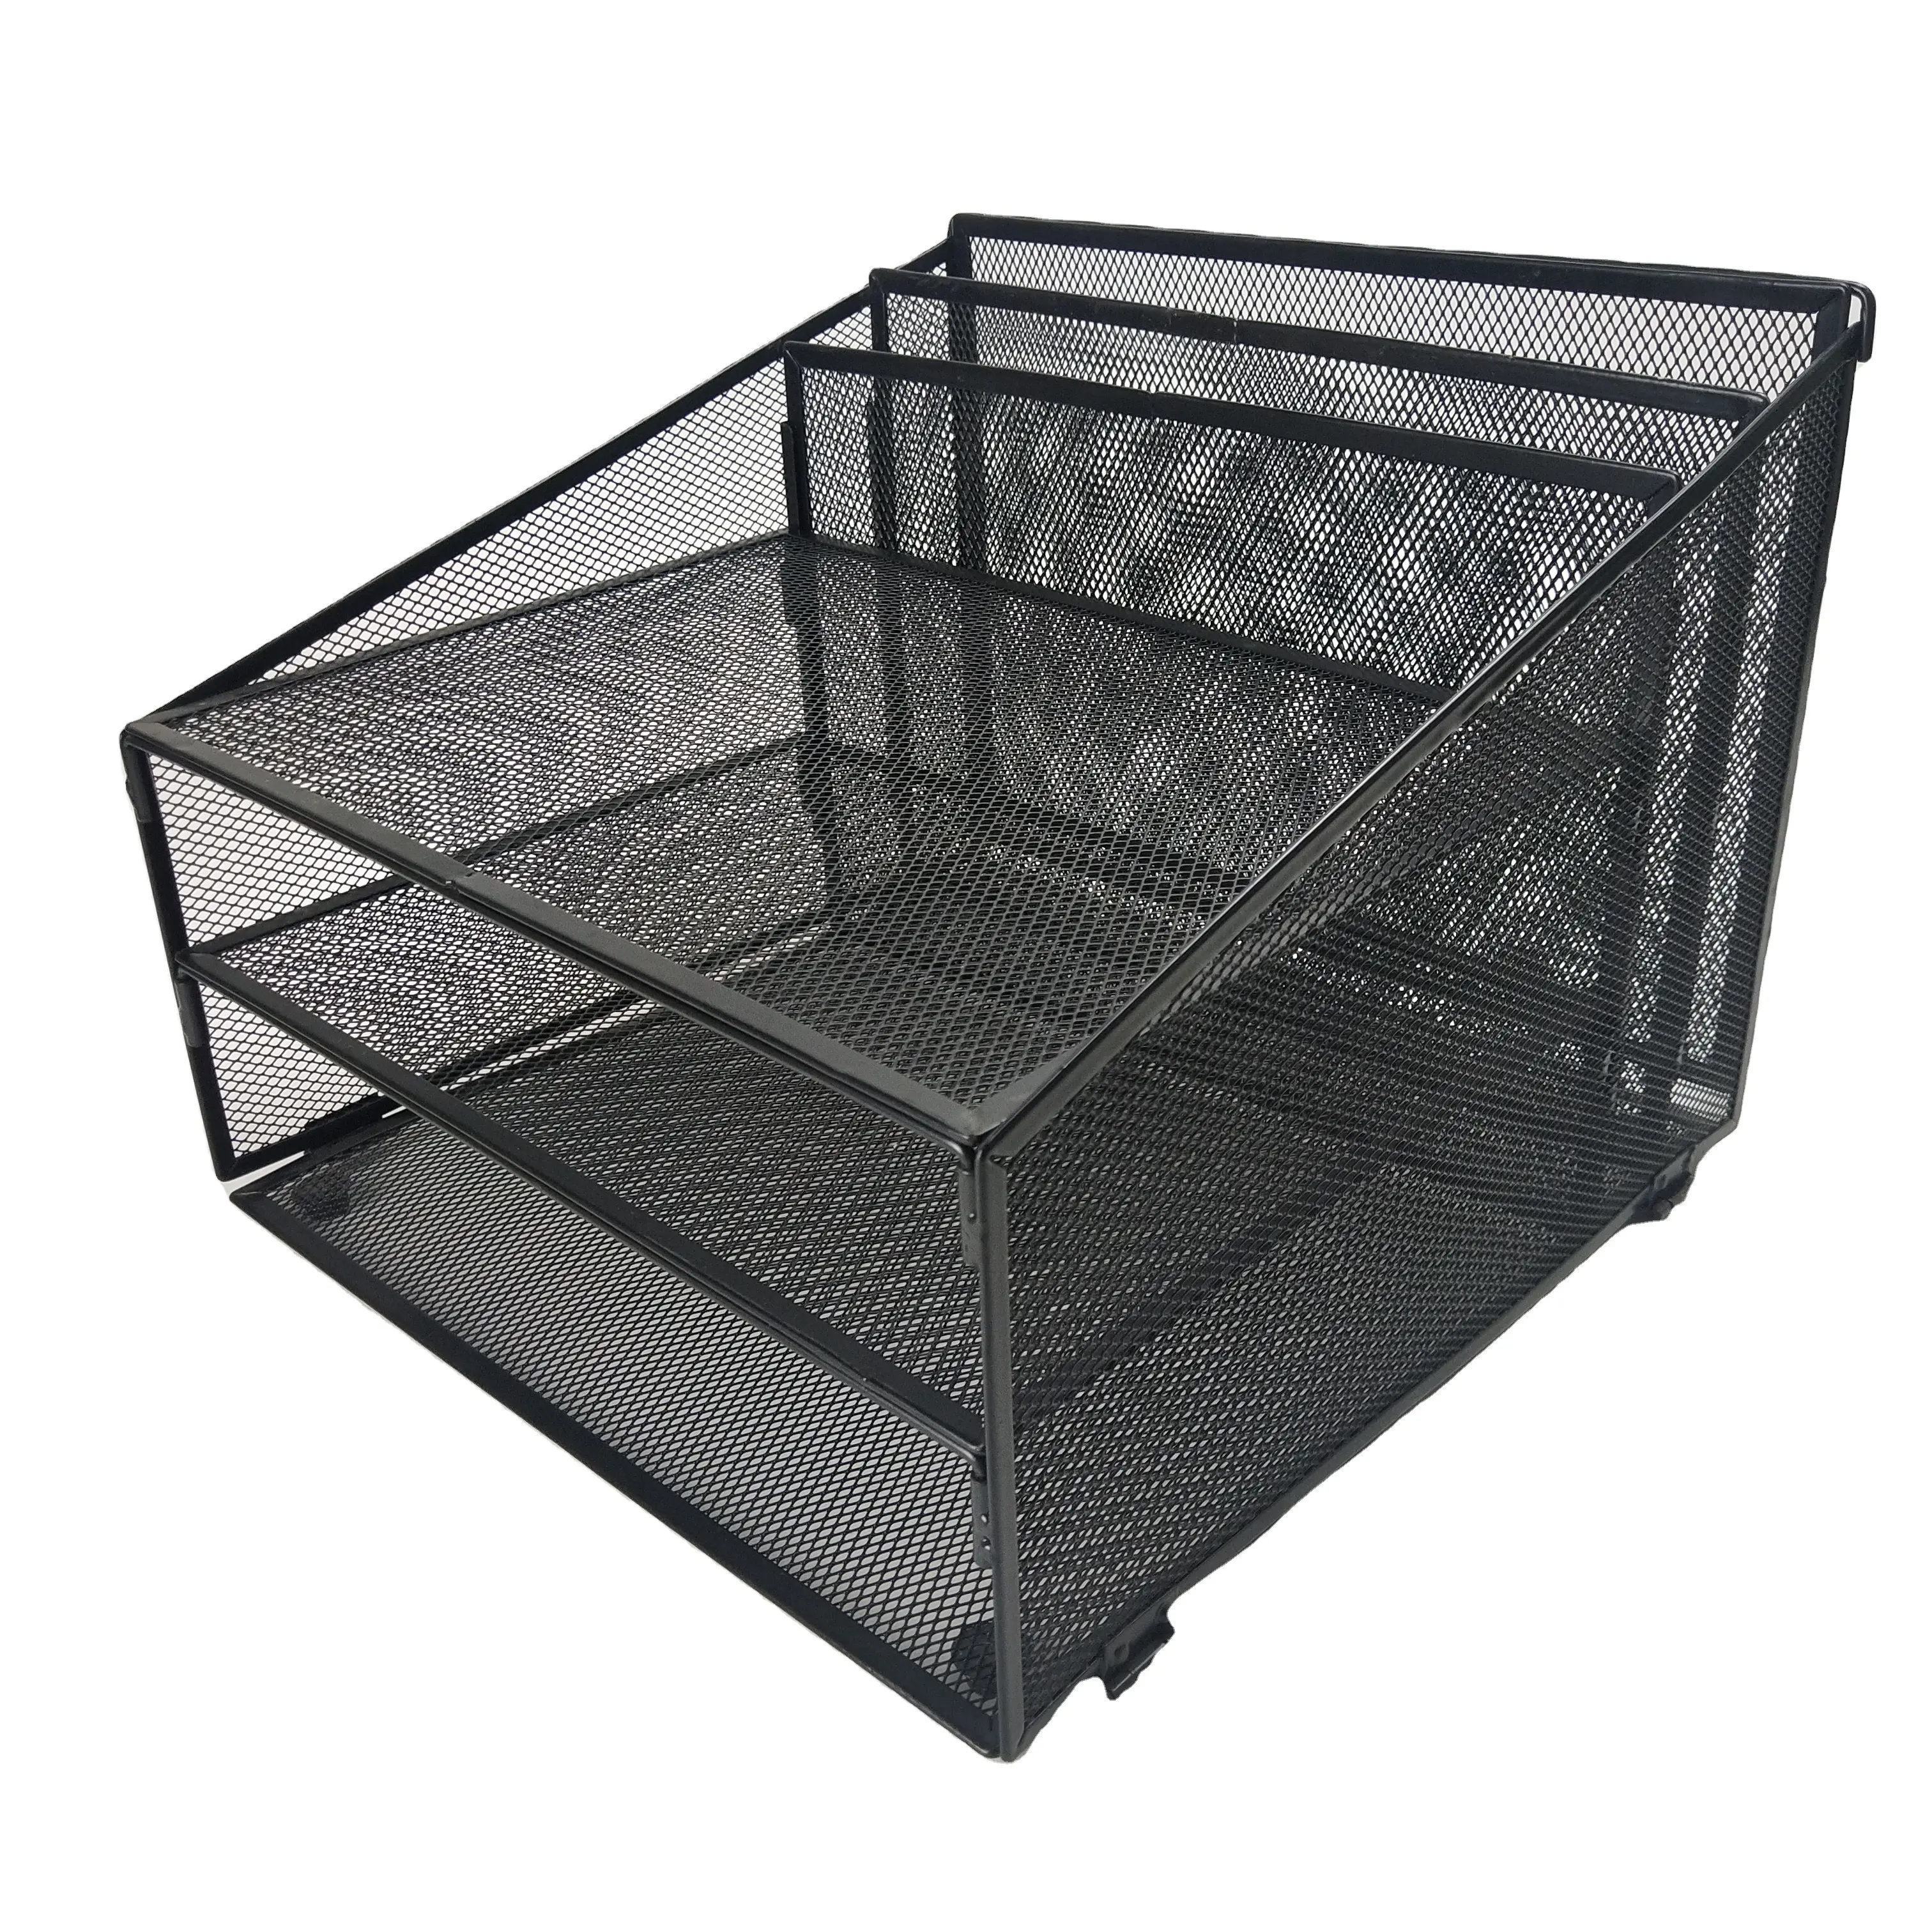 Office Accessories Metal Mesh Hanging Storage Basket 3 Compartment Wall Mounting Organizer Rack Magazine Document File Holder